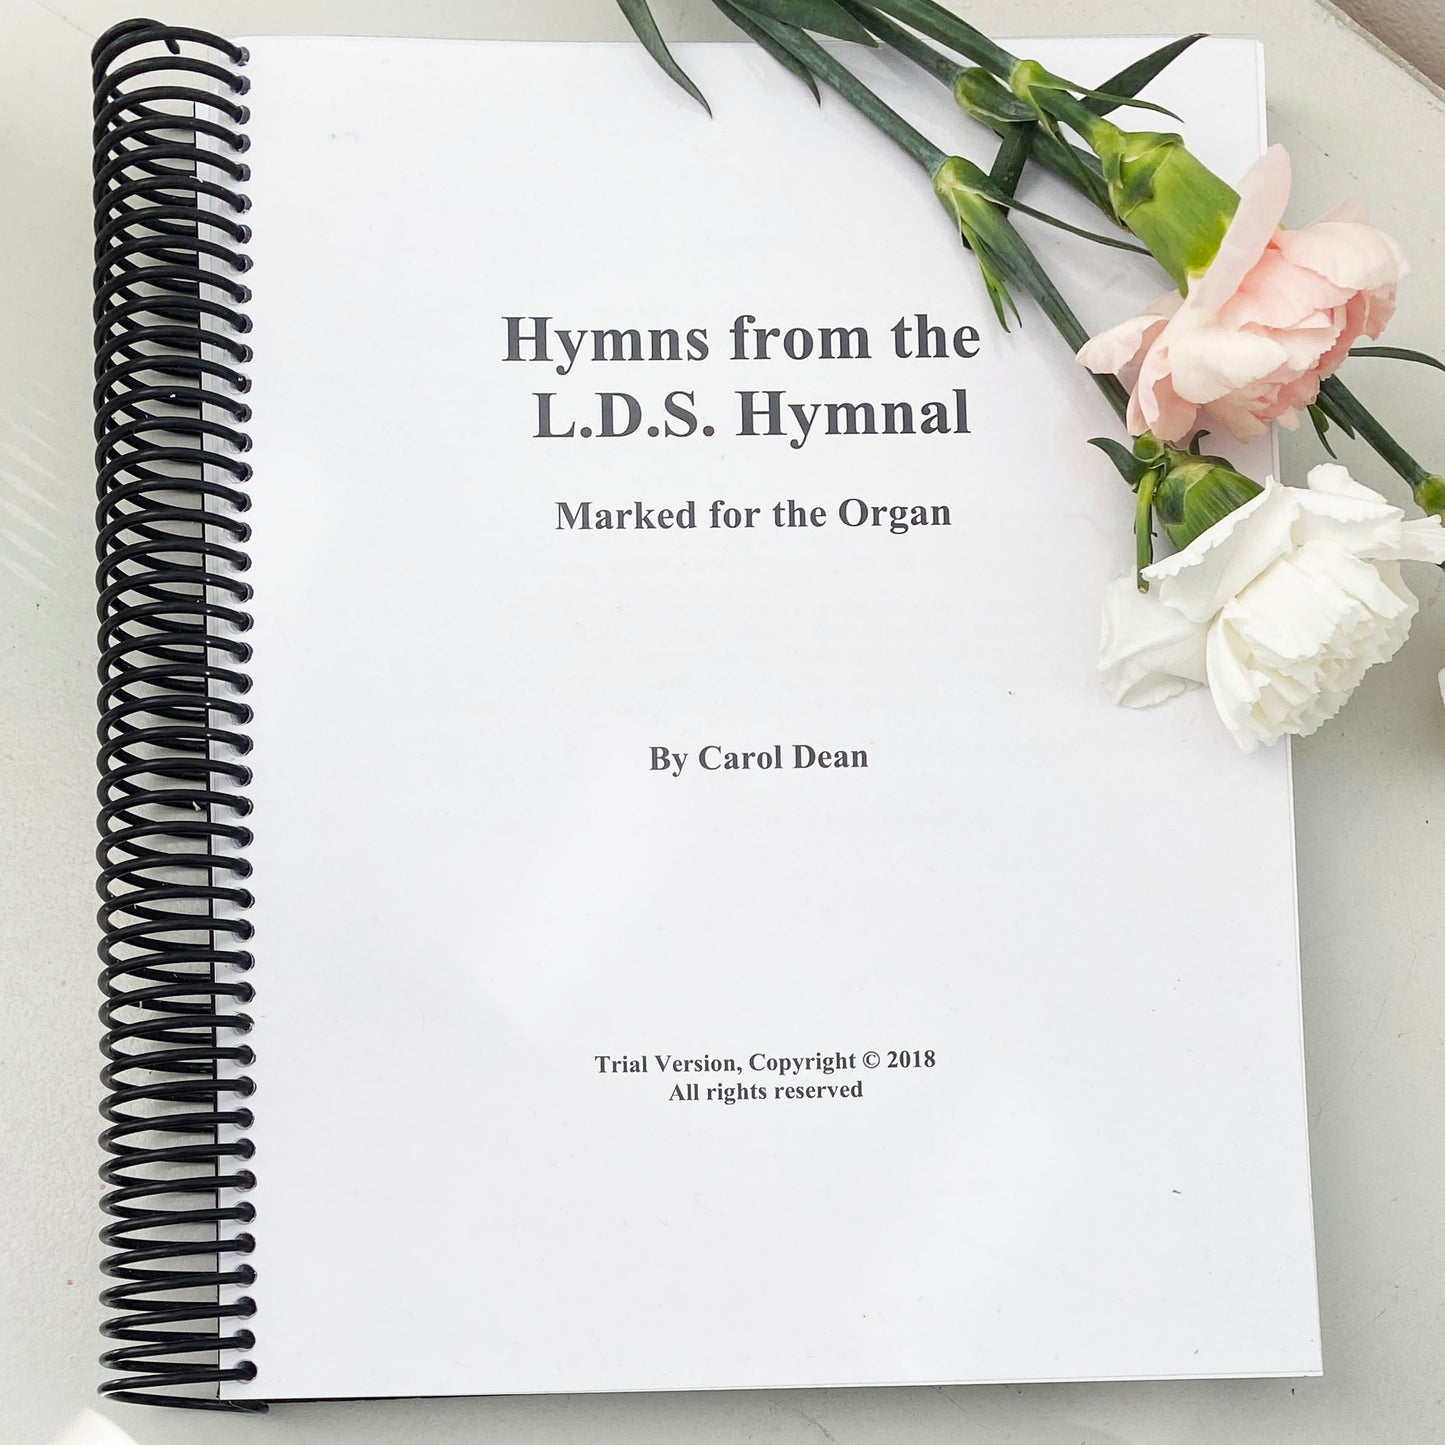 Hymns from the L.D.S. Hymnal by Carol Dean